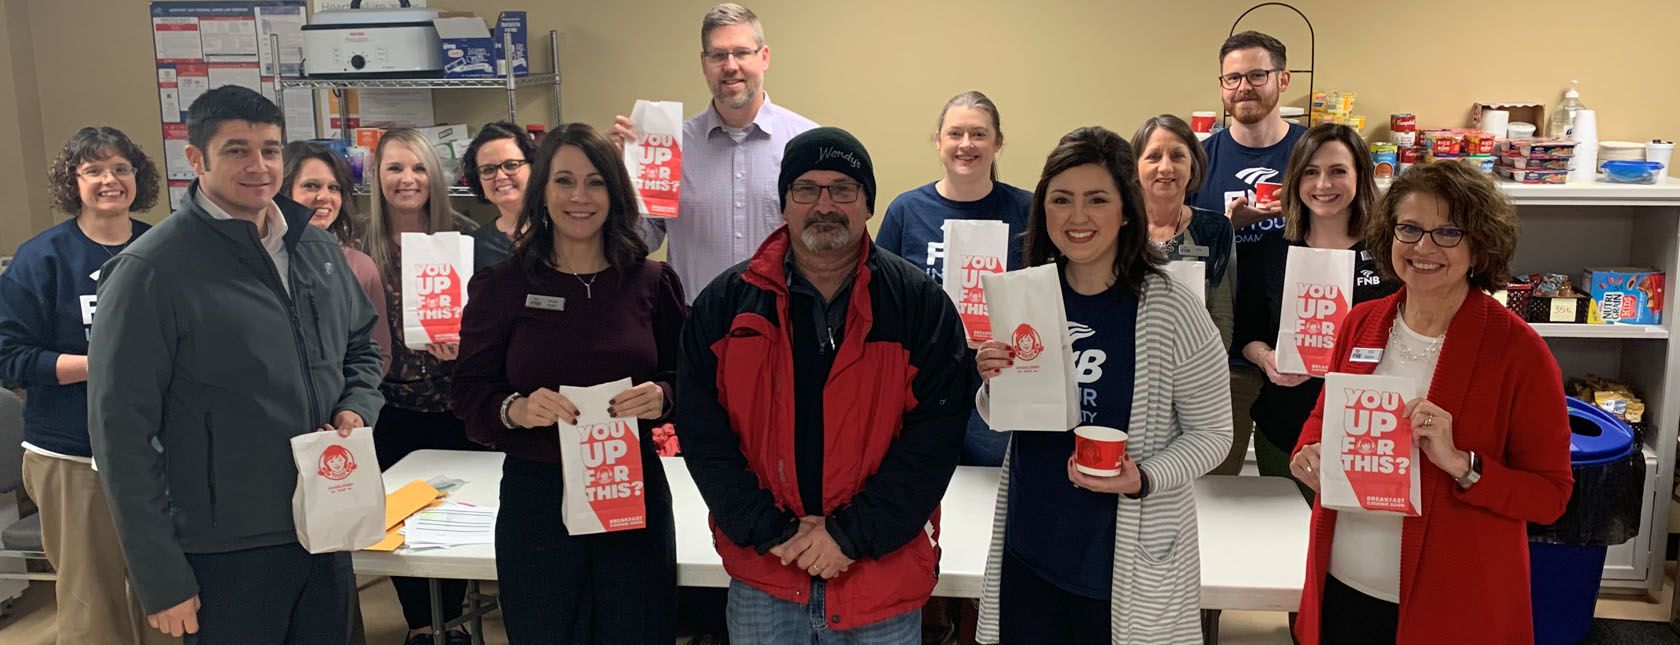 FNB & Wendy's of Mayfield Raise over $1800 from Fundraising Chili Lunch